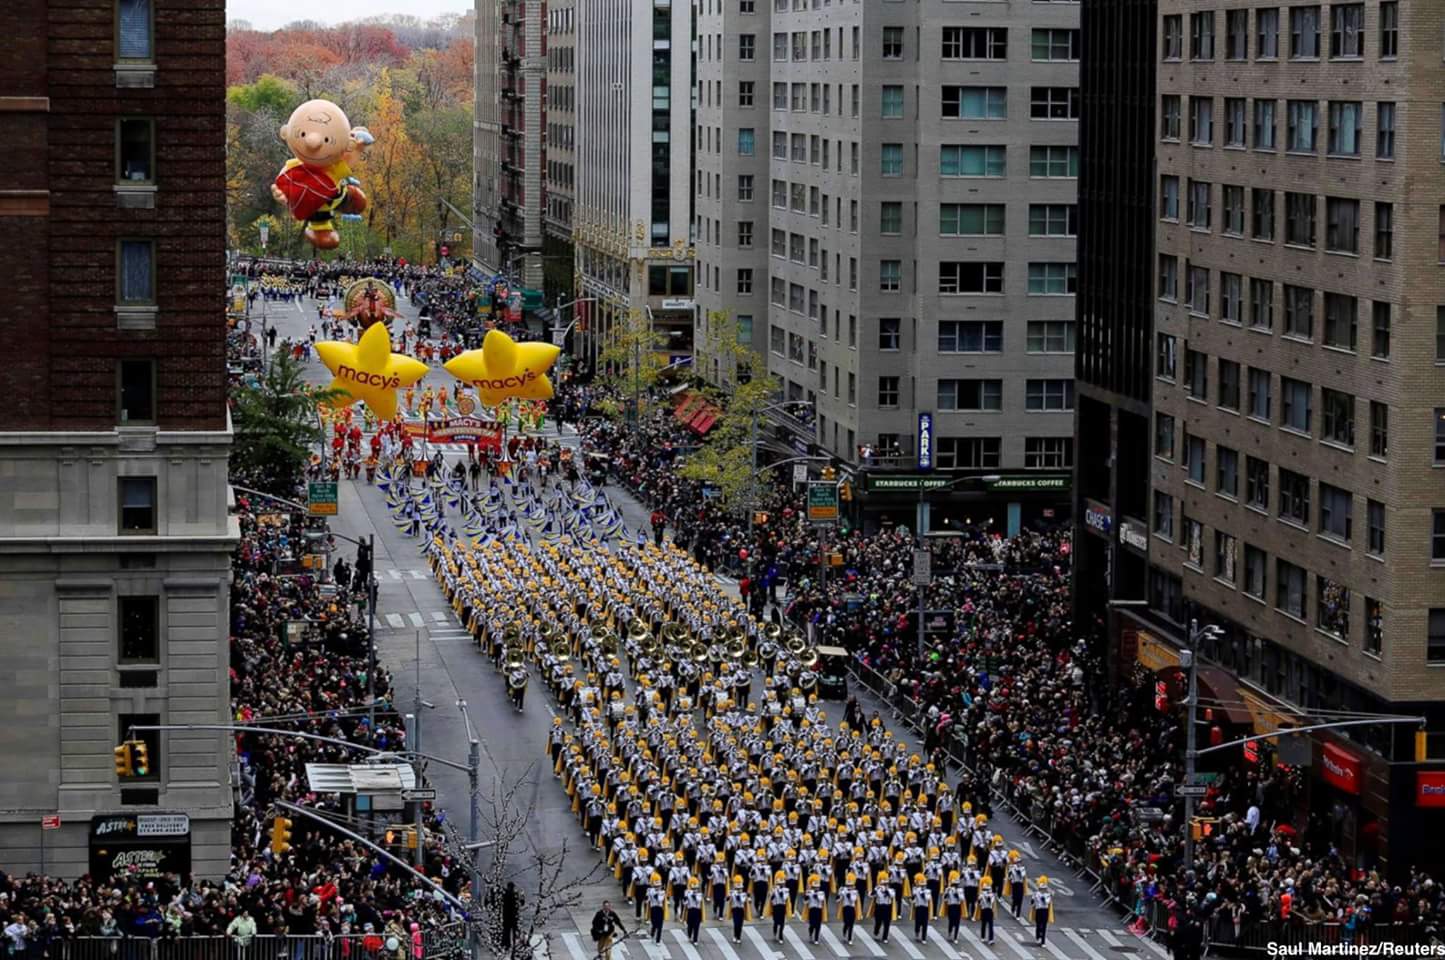 ETSU Marching Bucs invited to be in 2024 Macy's Thanksgiving Day Parade, Appalachian Highlands